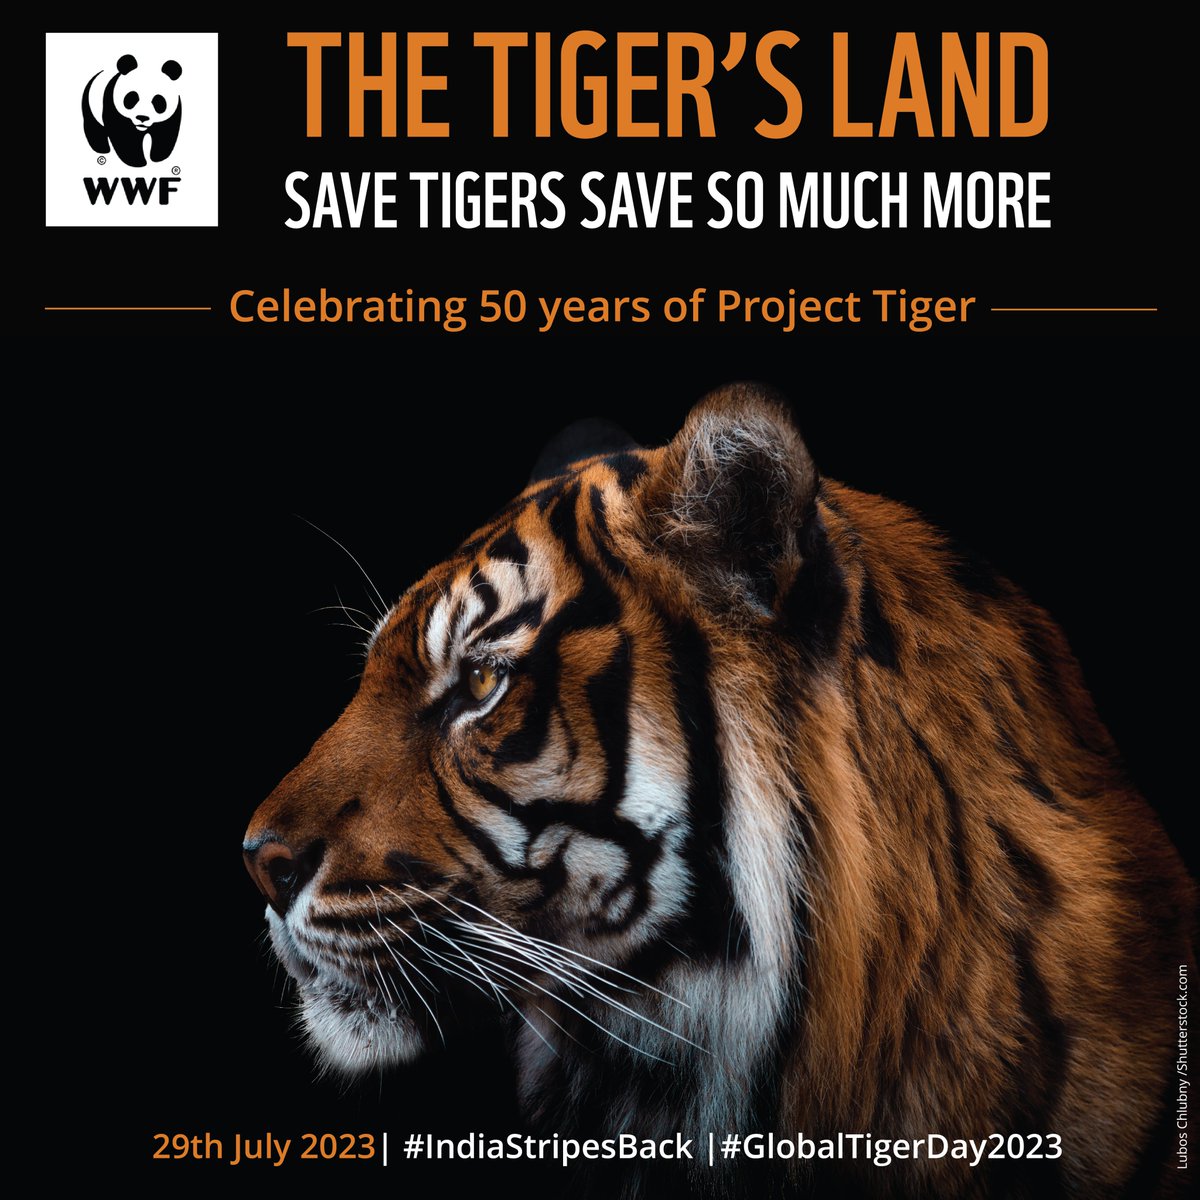 #GlobalTigerDay is observed every year on the 29th of July to raise awareness about the importance of #TigerConservation. The day was founded in 2010 when the 13 tiger range countries came together to double the number of wild tigers.
#IndiaStripesBack #WWFIndia